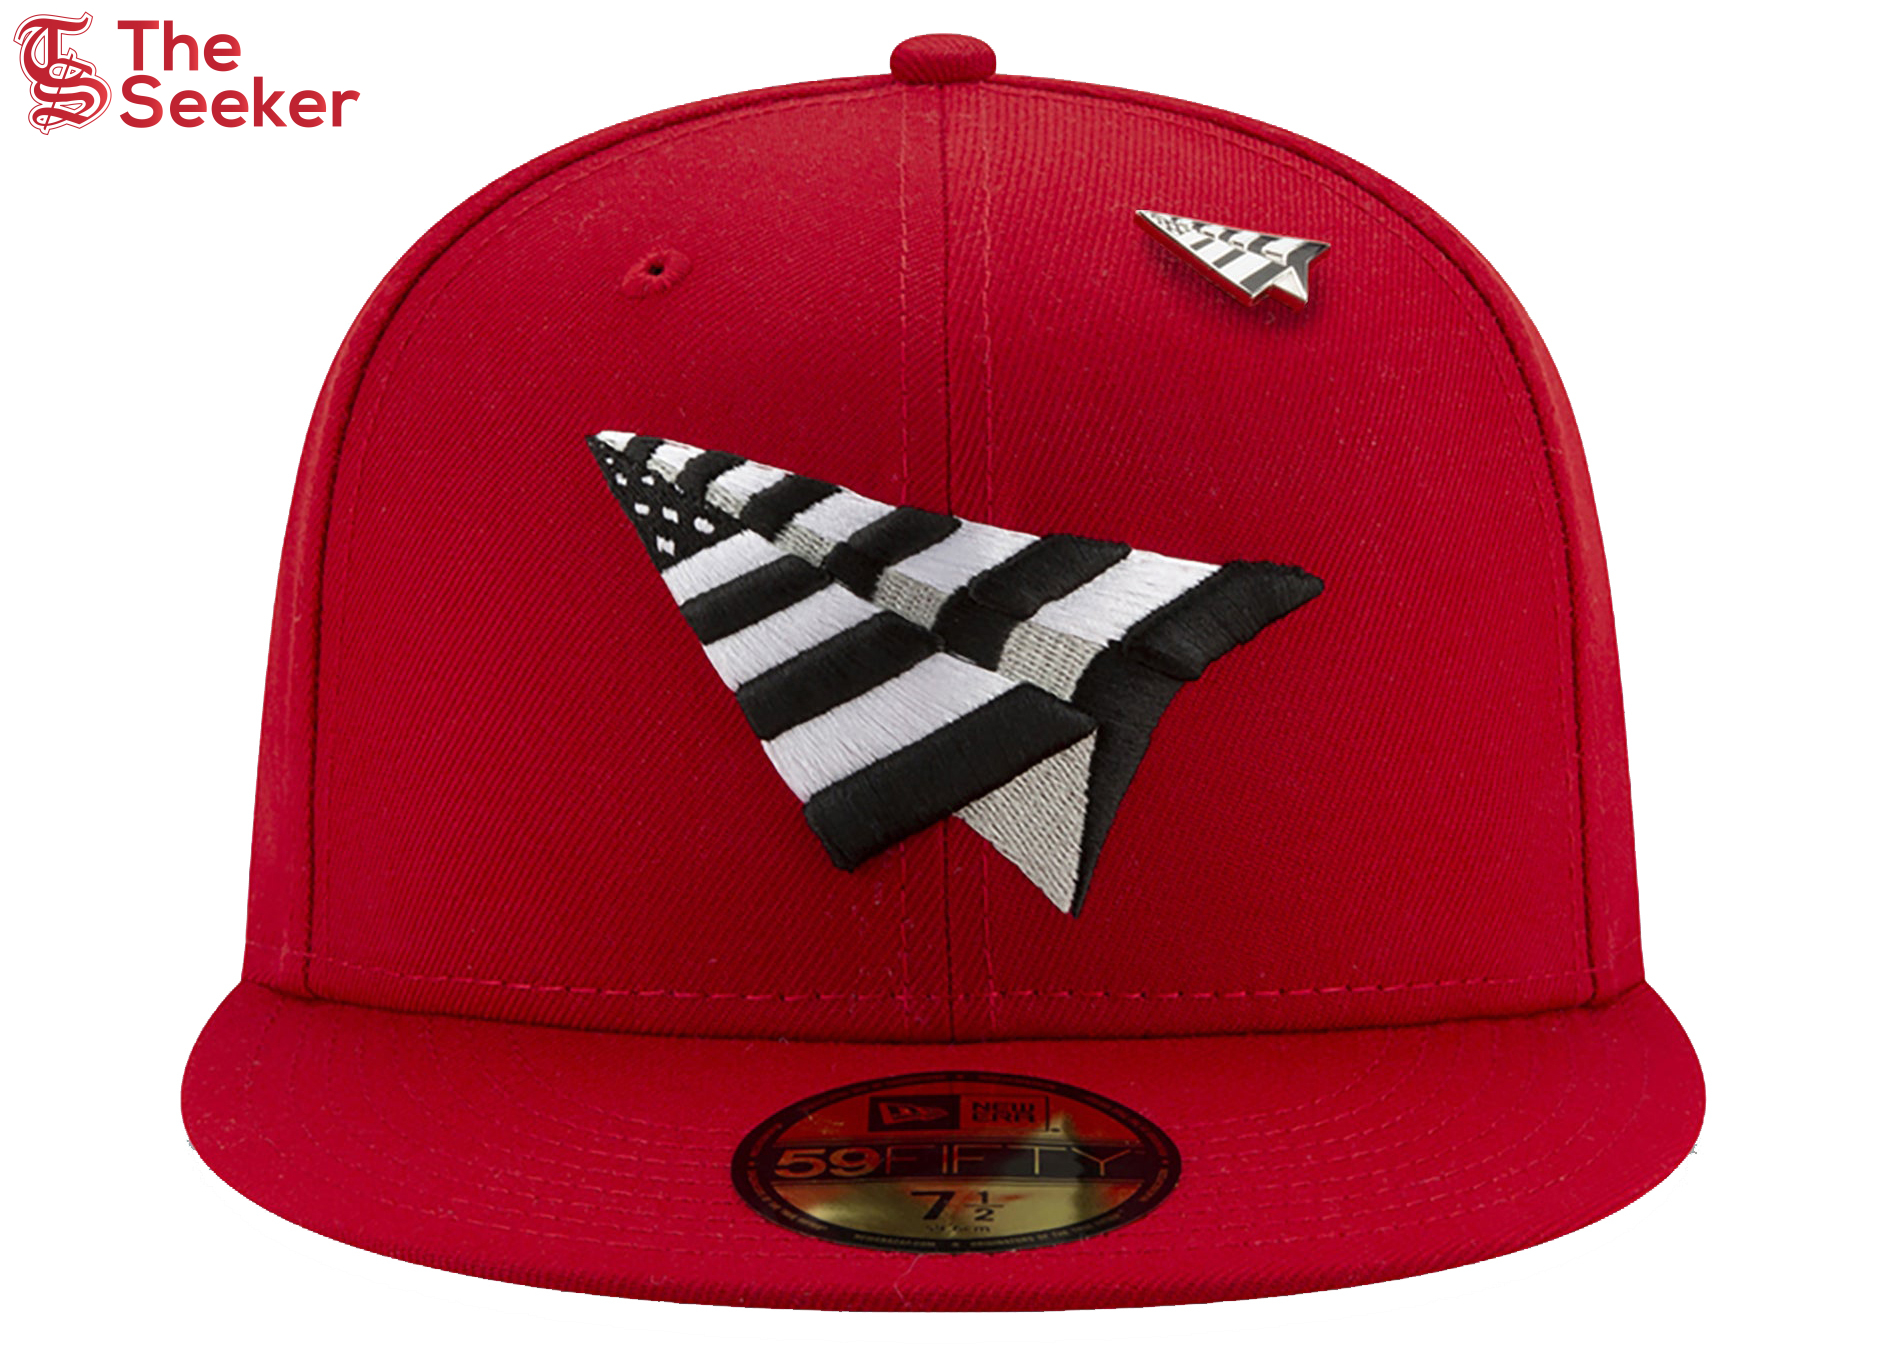 New Era x Paper Planes Crimson Crown Fitted Hat Red